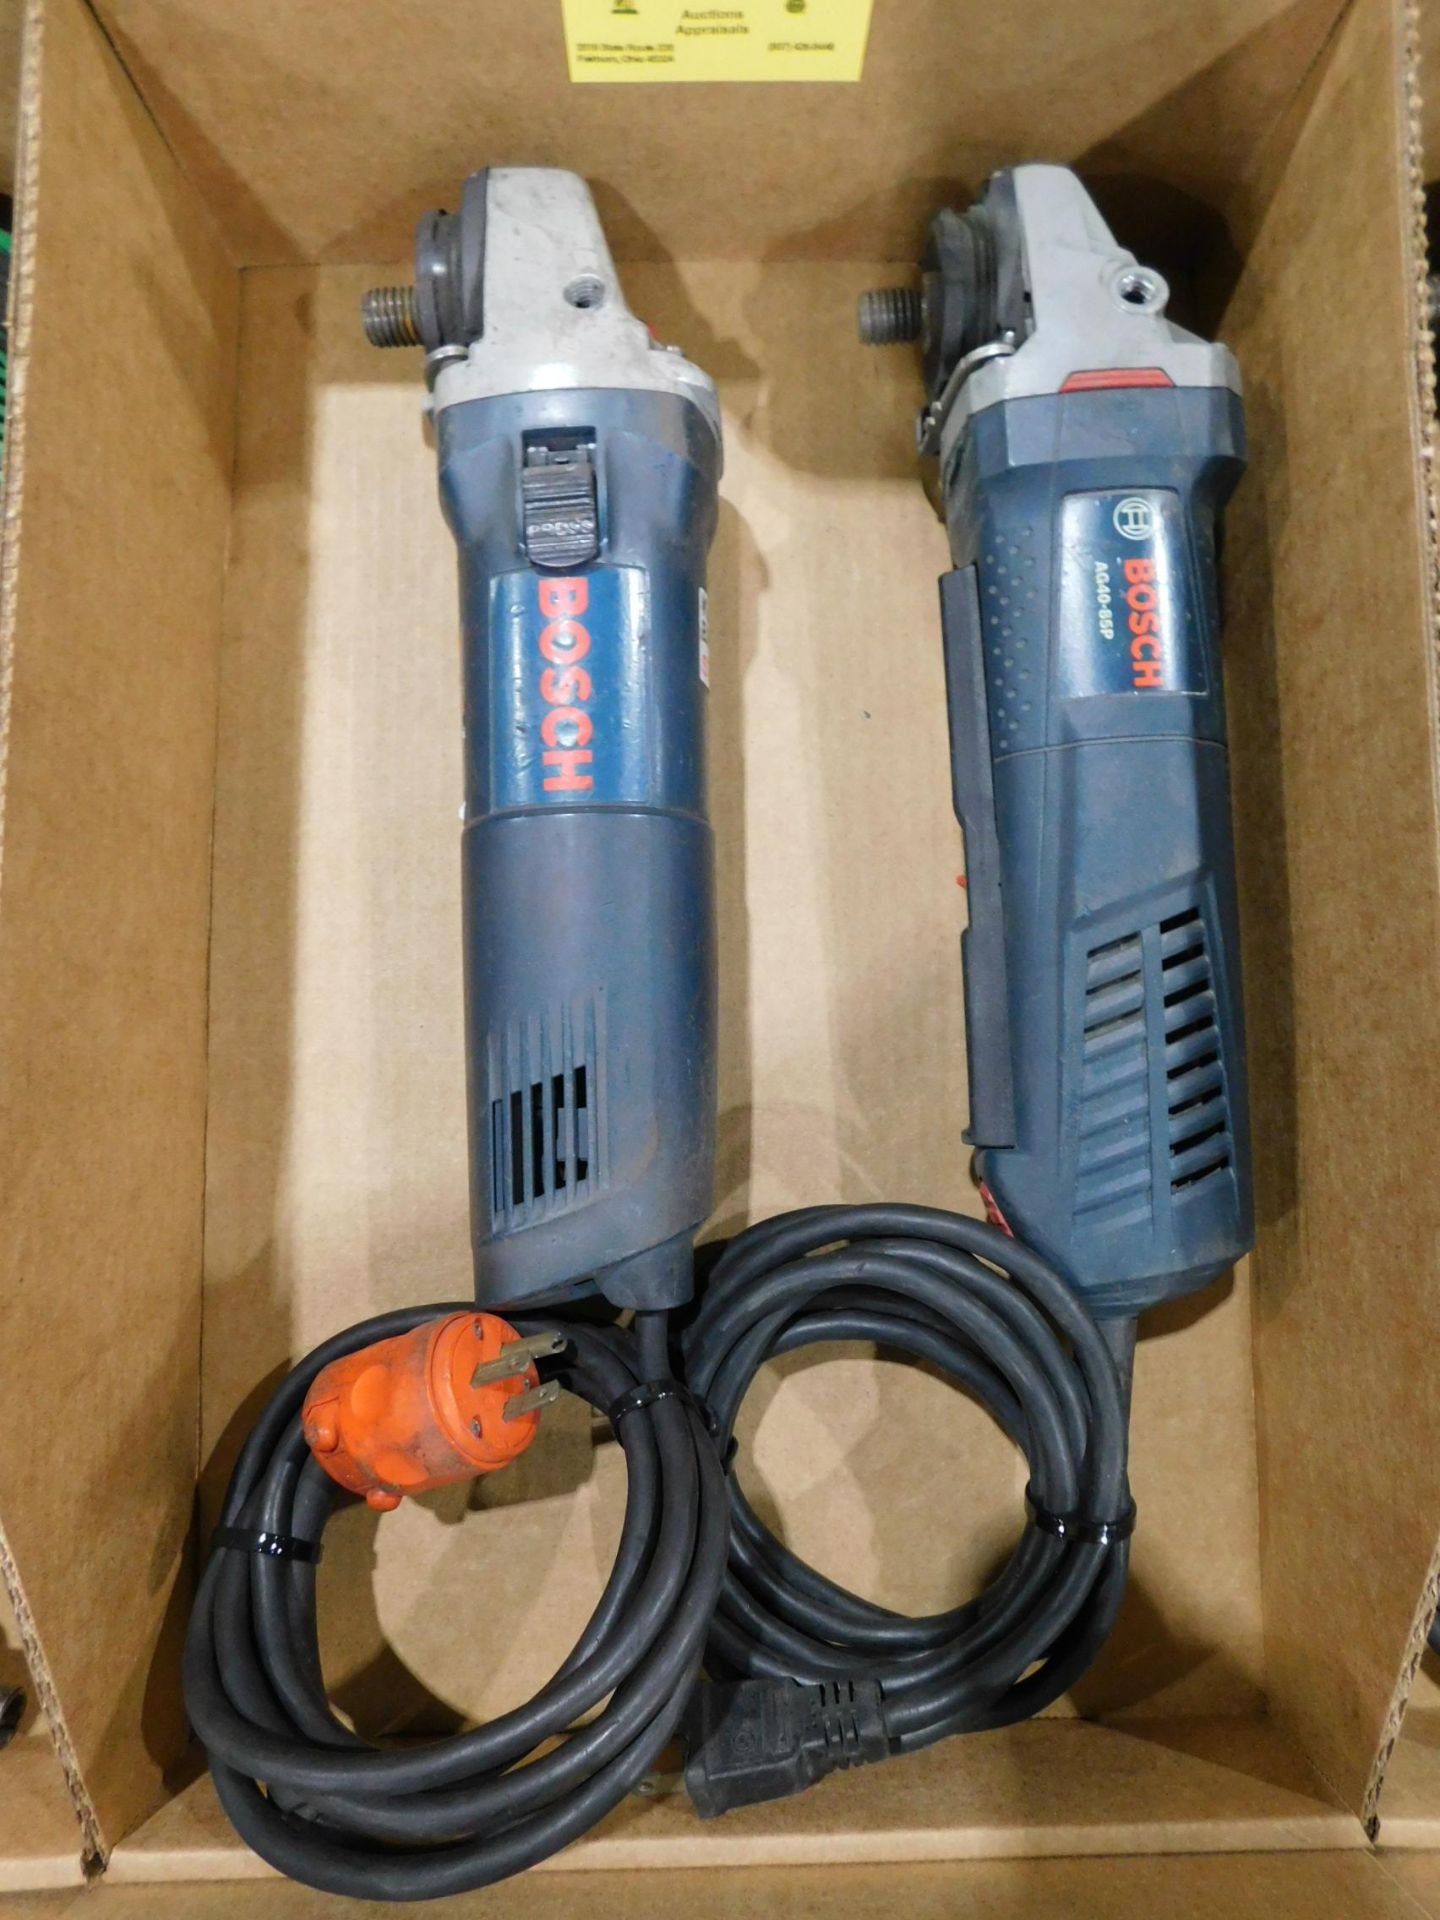 (2) Bosch 4 1/2" Right Angle Grinders